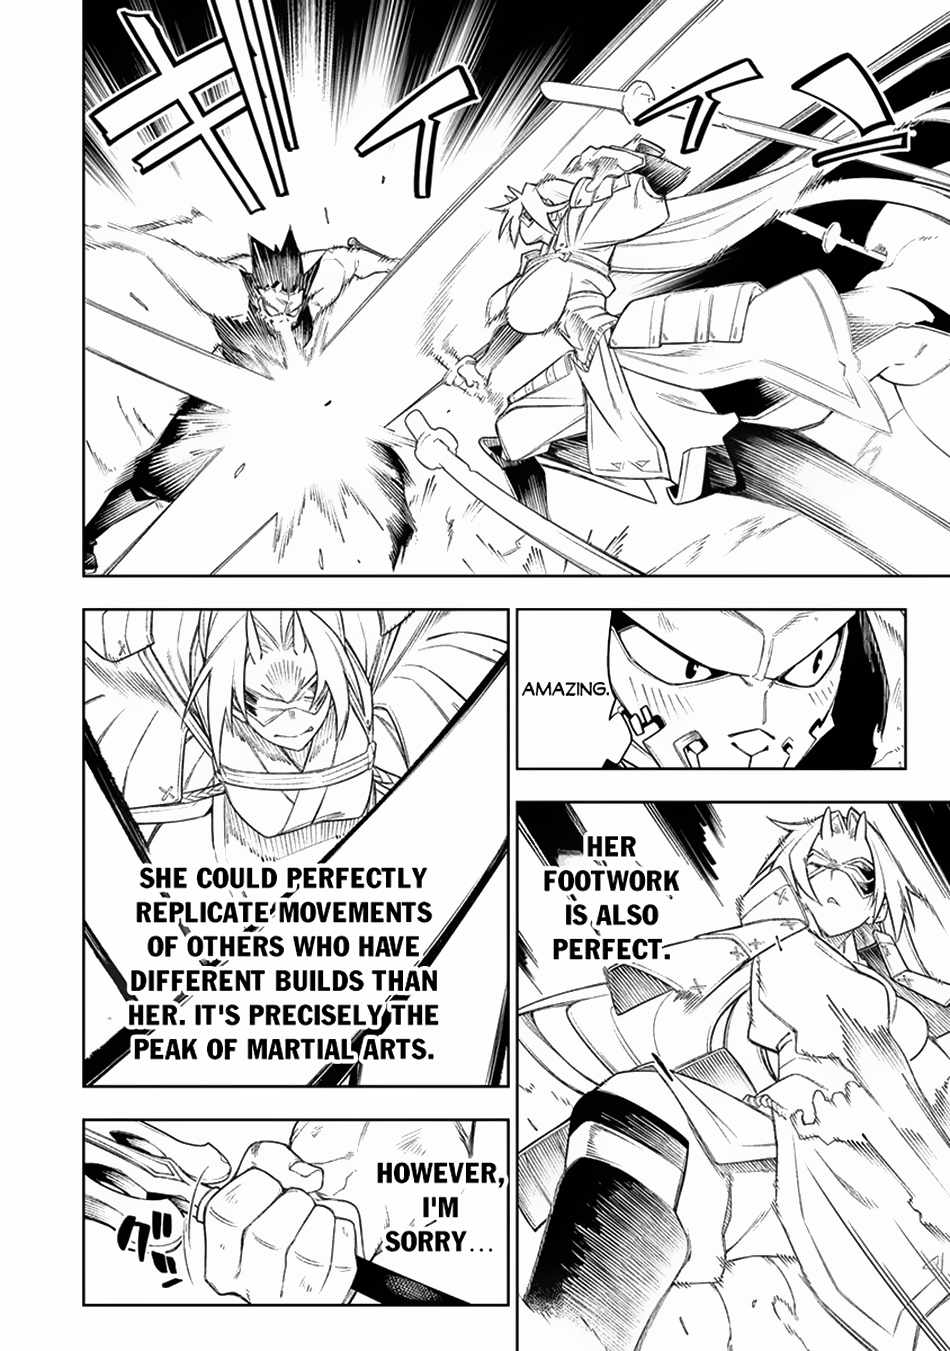 The Betrayed Hero Who Was Reincarnated As The Strongest Demon Lord - 14 page 19-1766e339